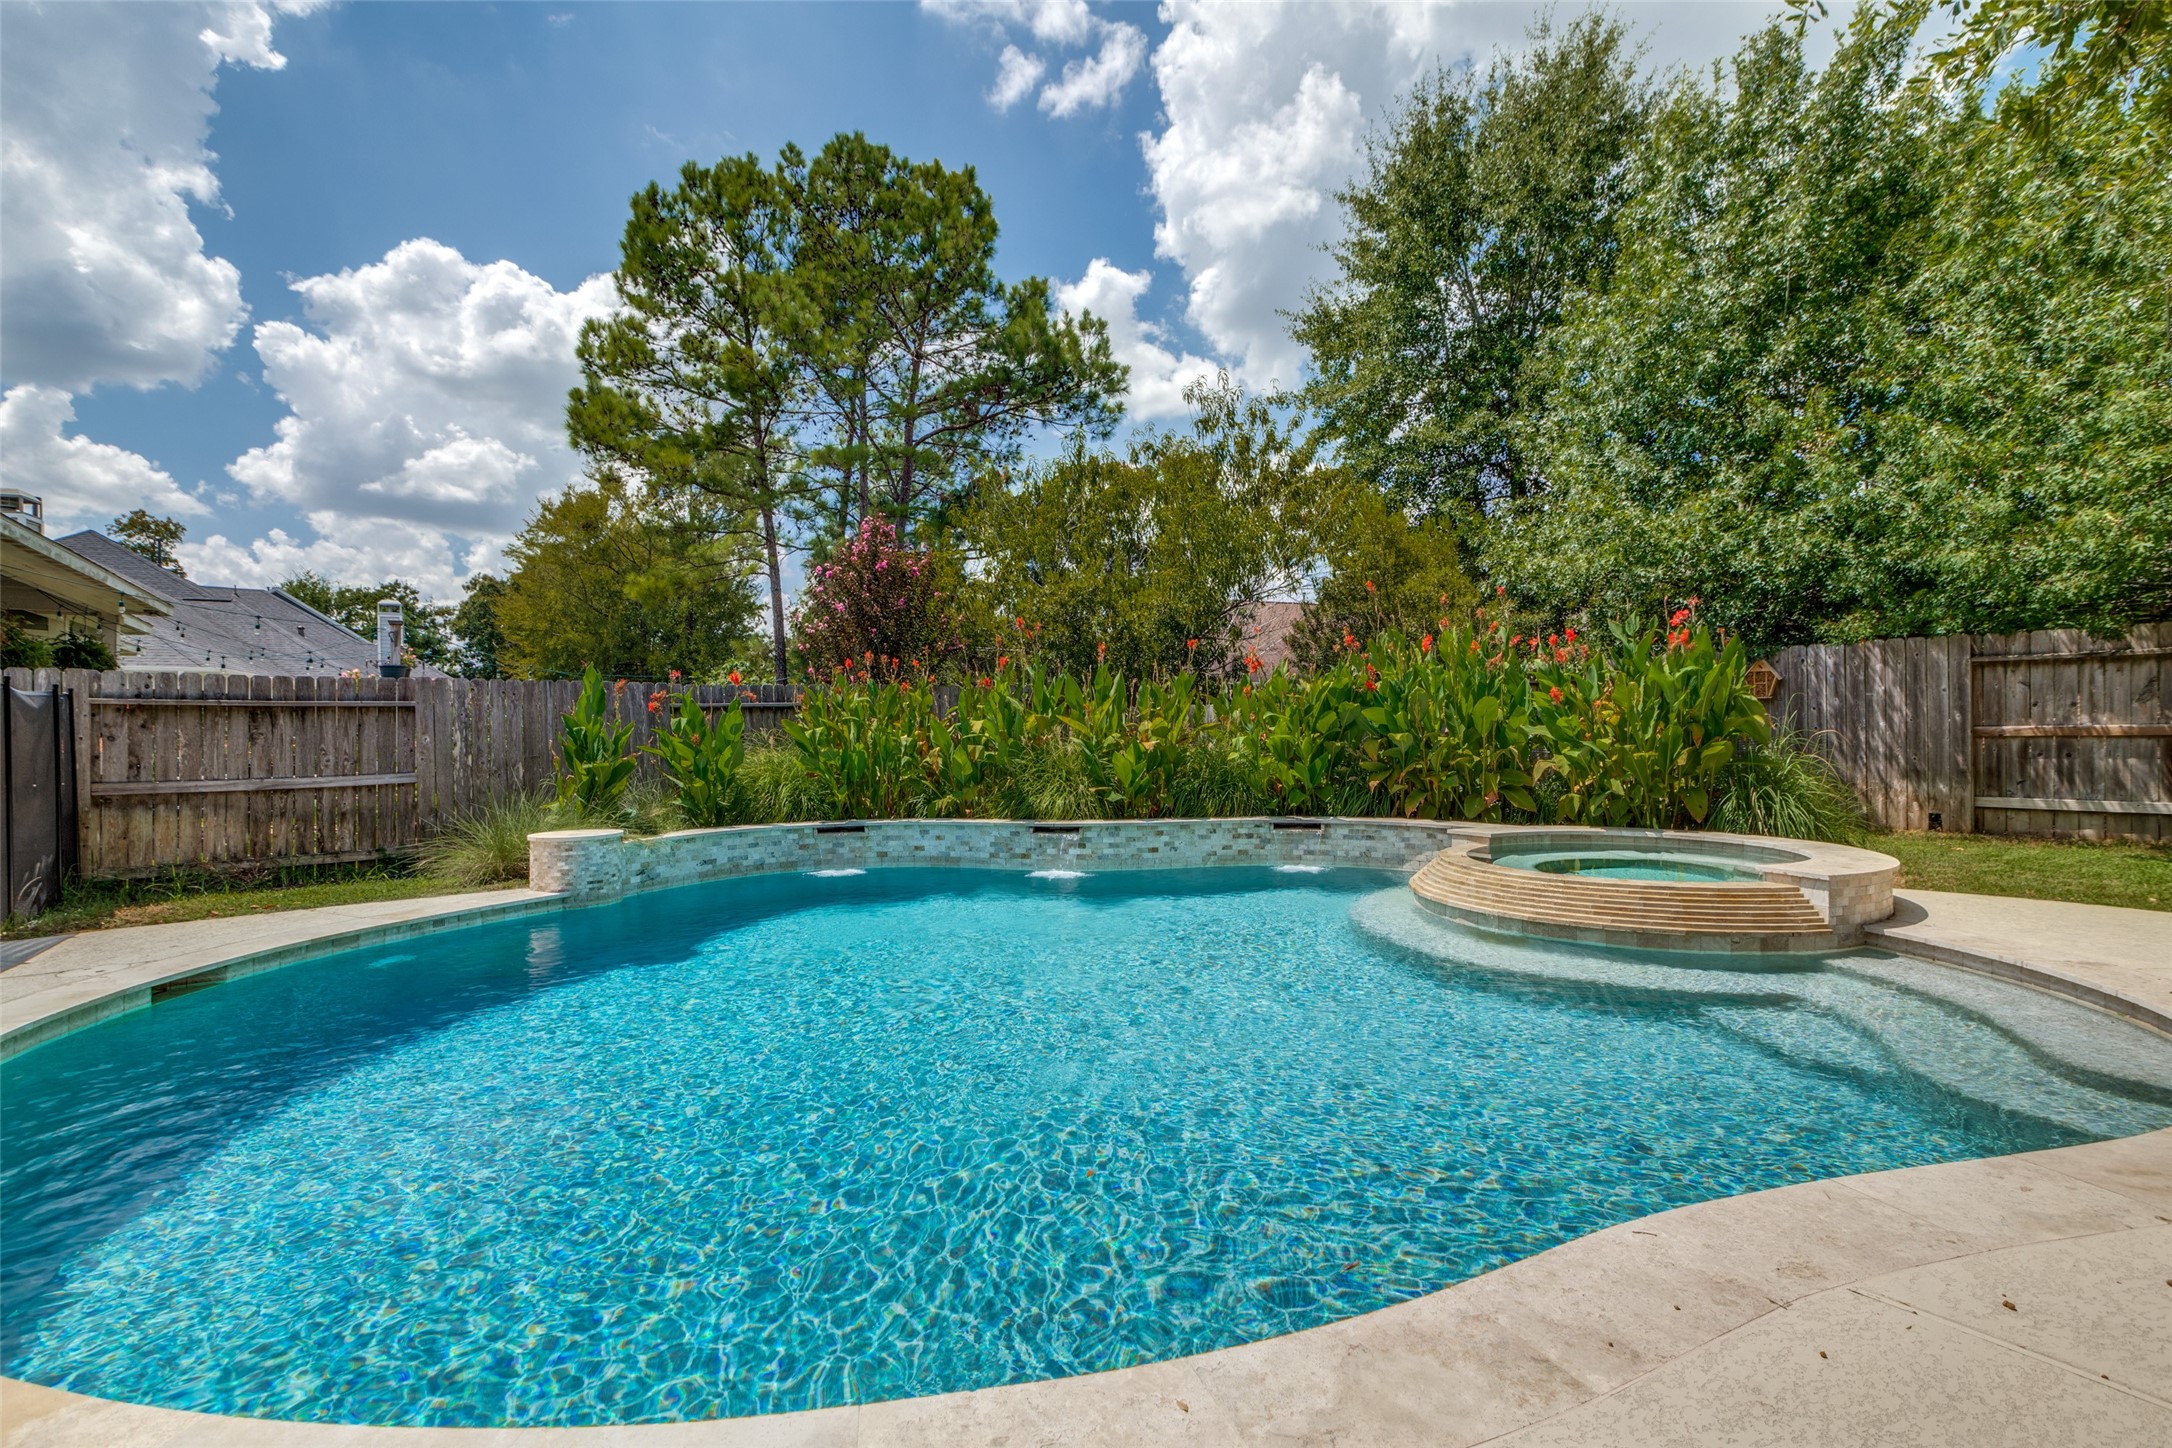 Lush landscaping is a great backdrop to the pool.